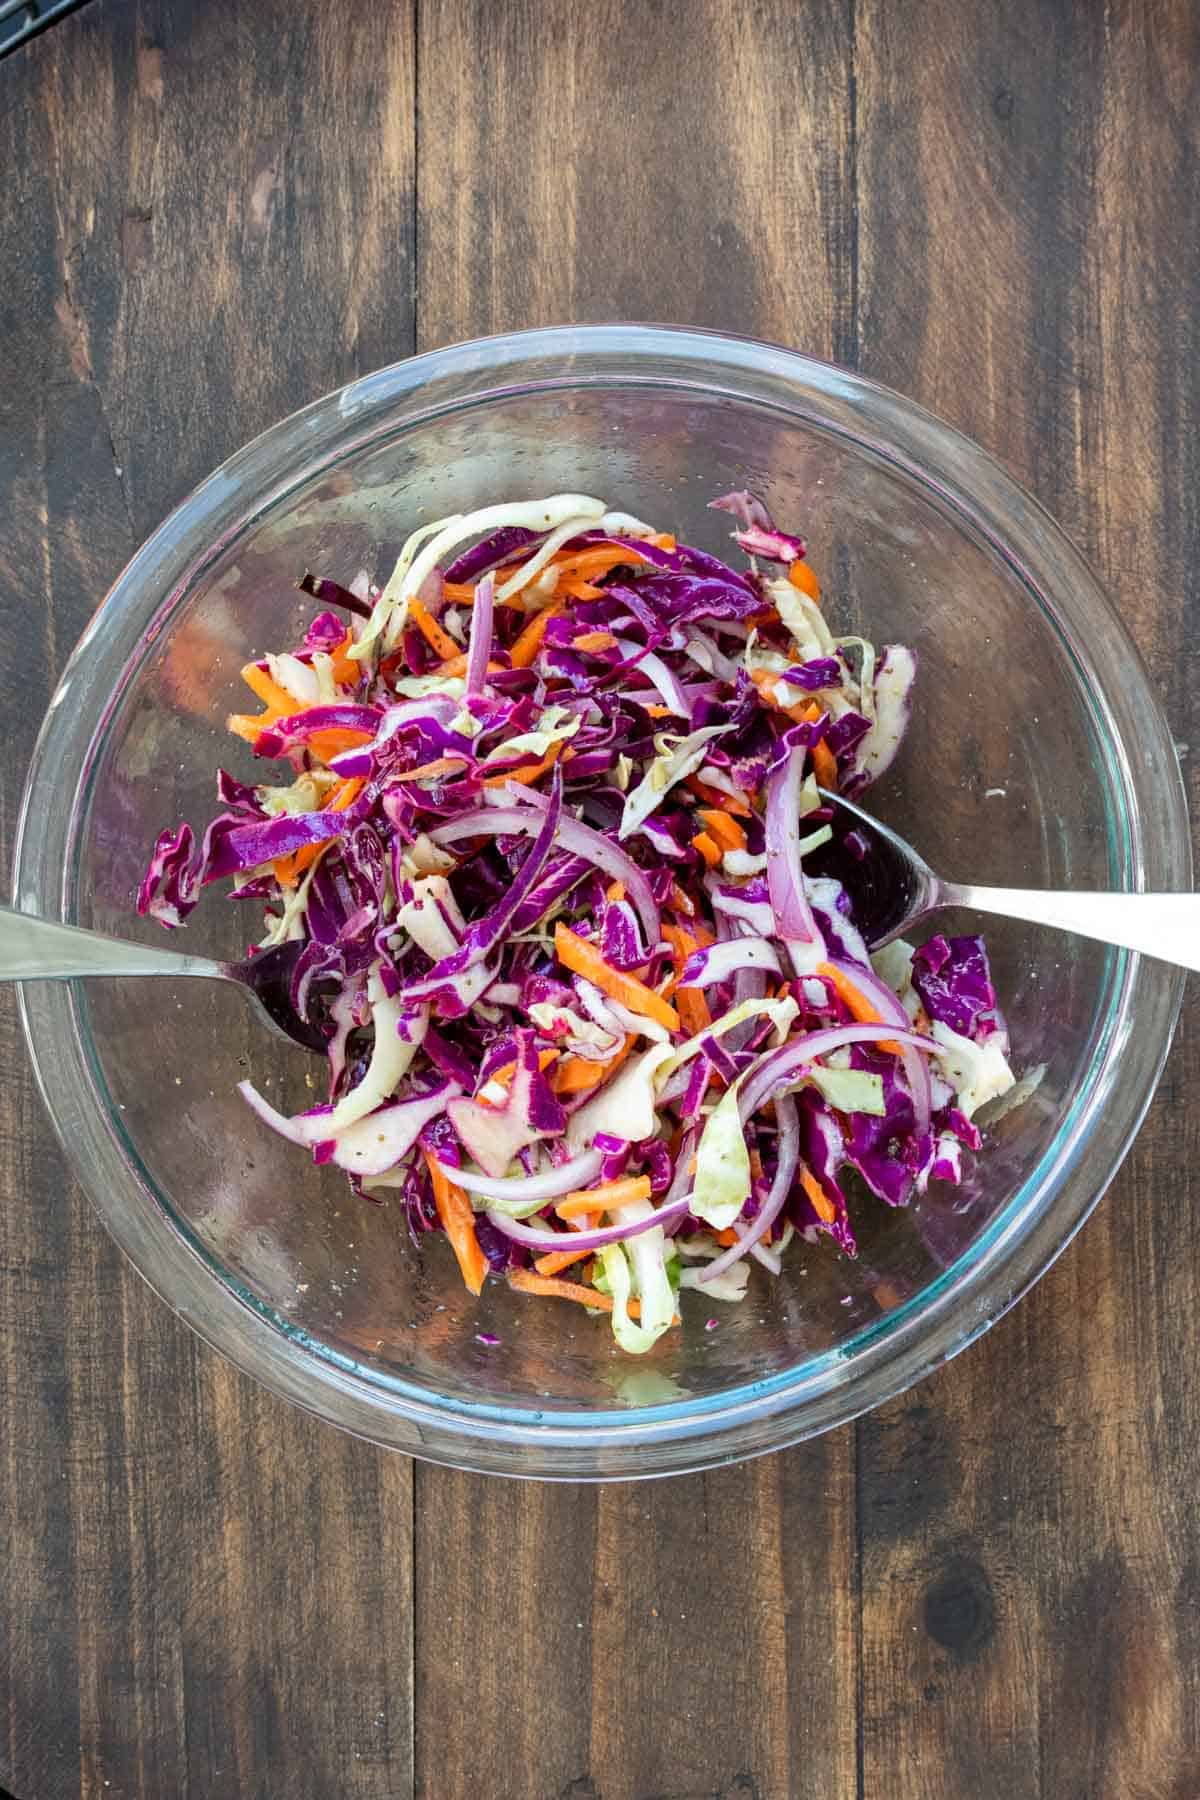 Glass bowl with shredded purple cabbage, carrots and red onion